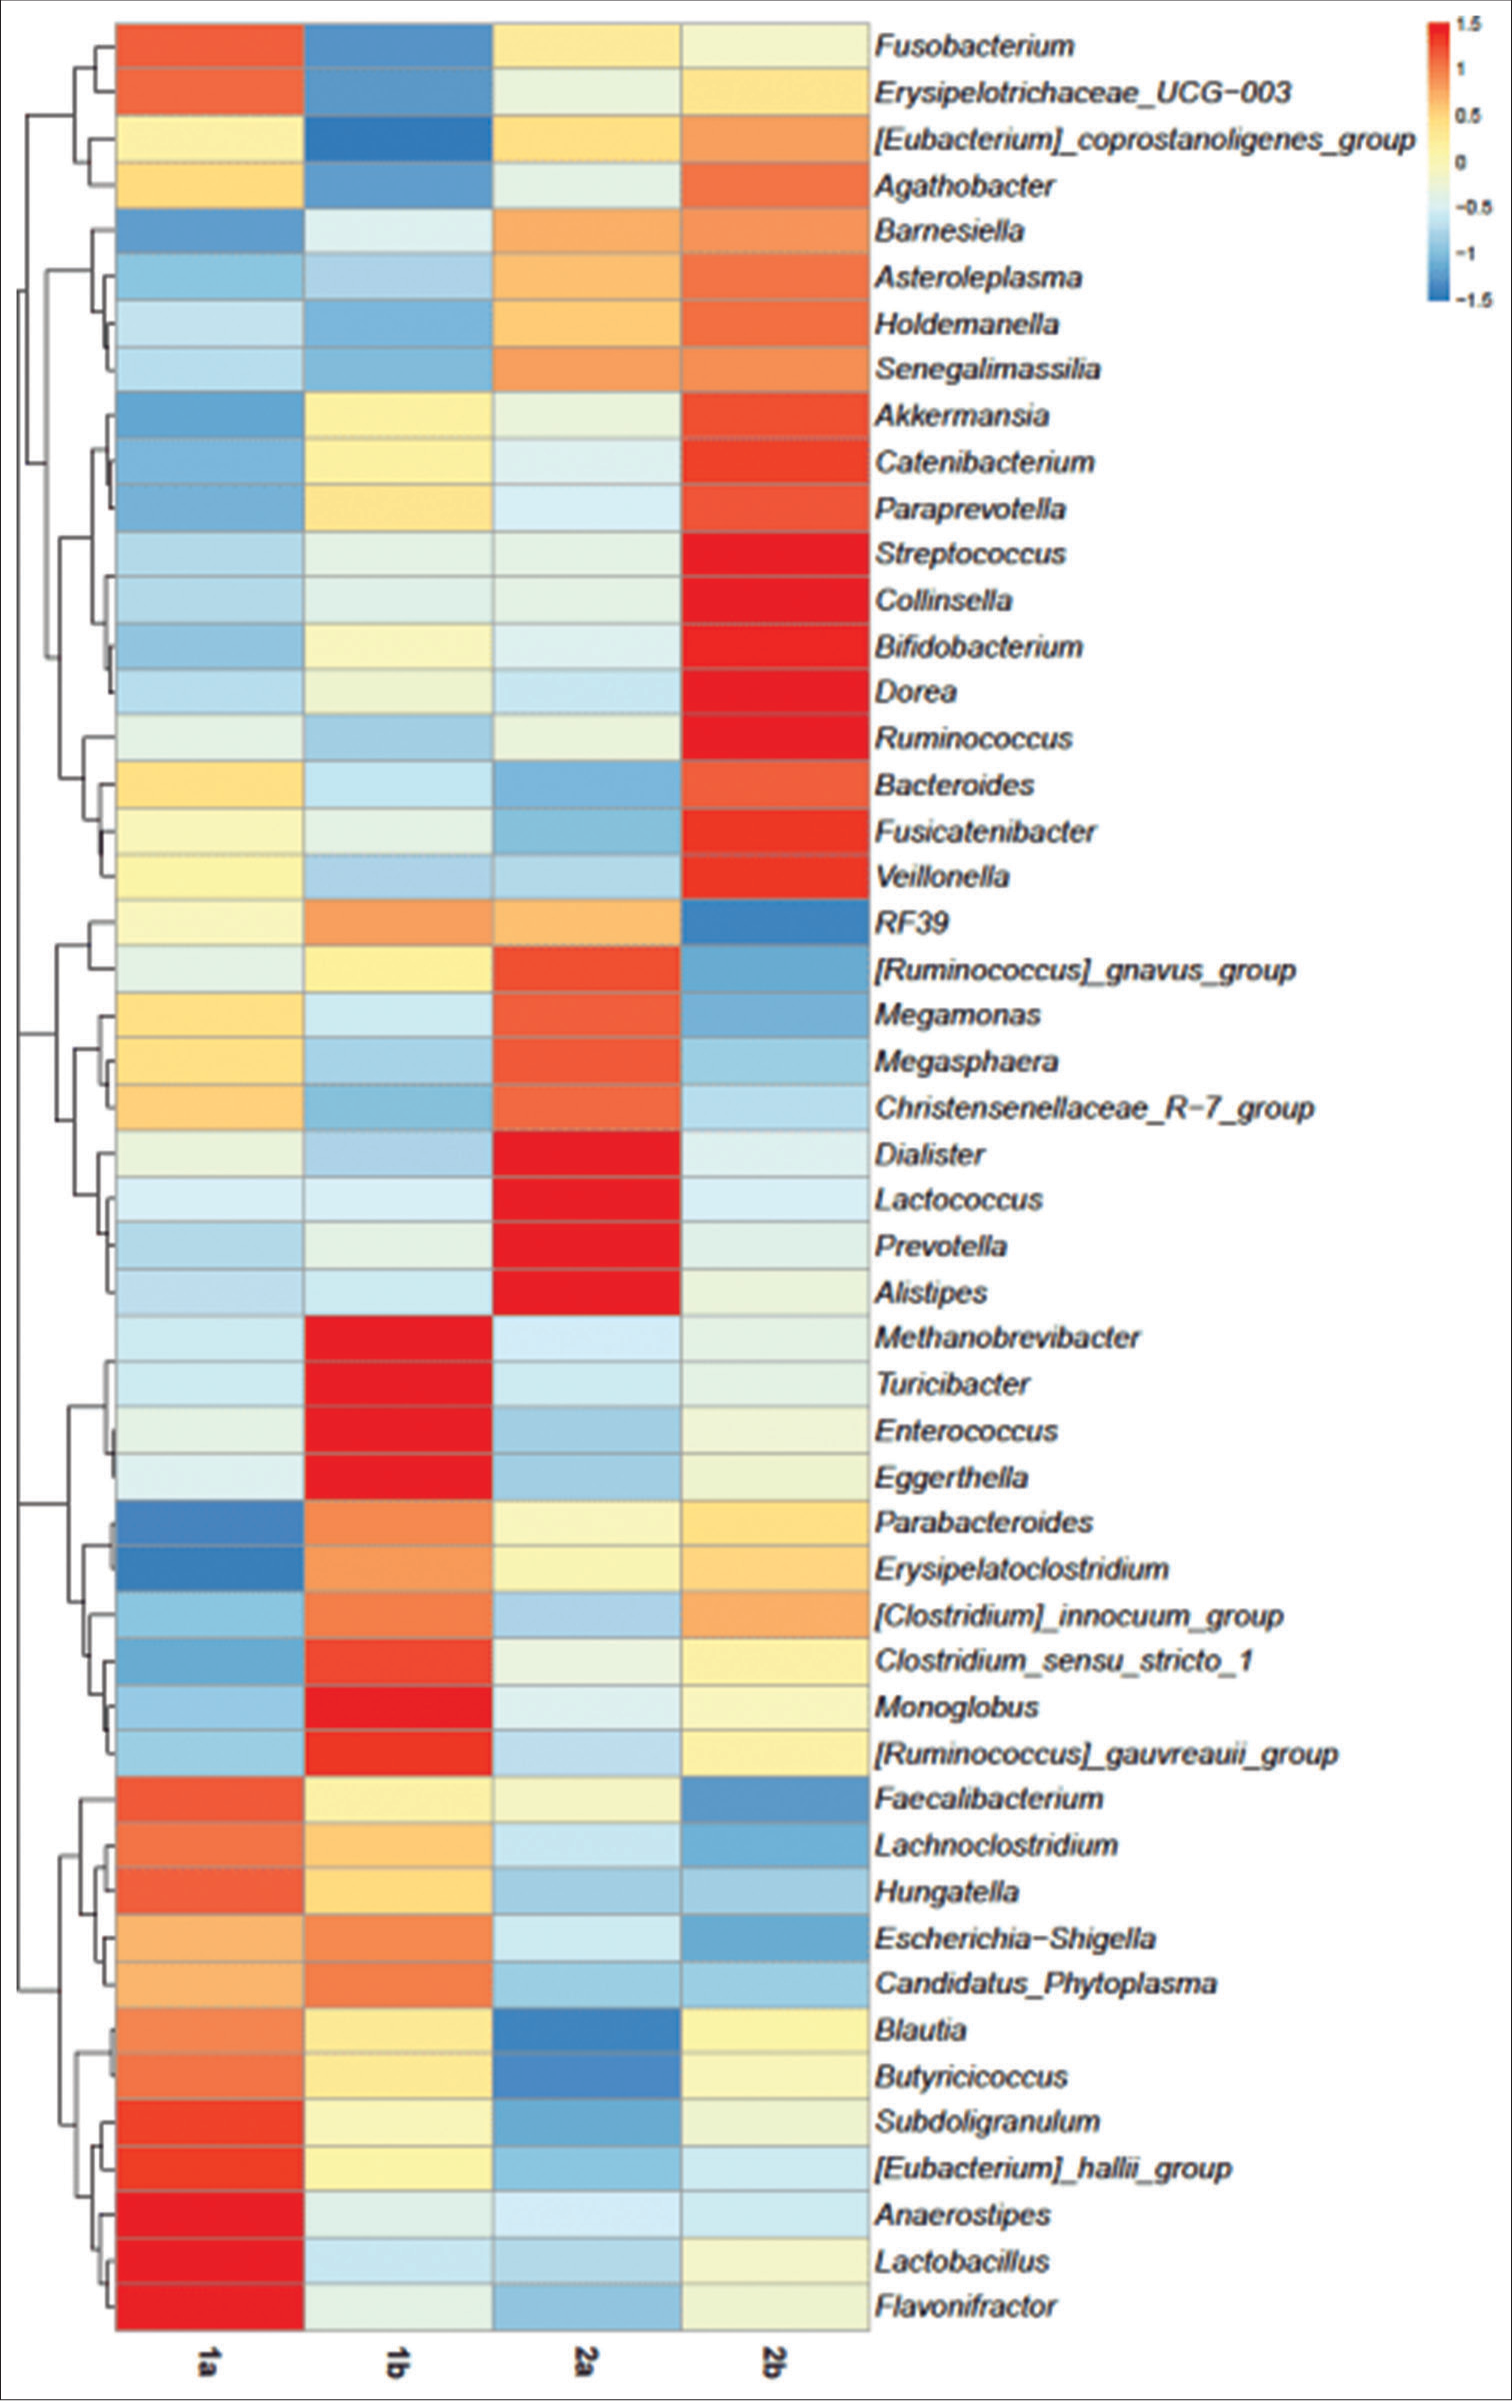 Heatmap depicting the abundance of prokaryotic genera of subgroups on day 0 and day 5. (1a) Subgroup treatment-experienced at day 0, (1b) subgroup treatment-experienced at day 5, (2a) subgroup treatment-not-experienced at day 0, and subgroup (2b) treatment-not-experienced at day 5.